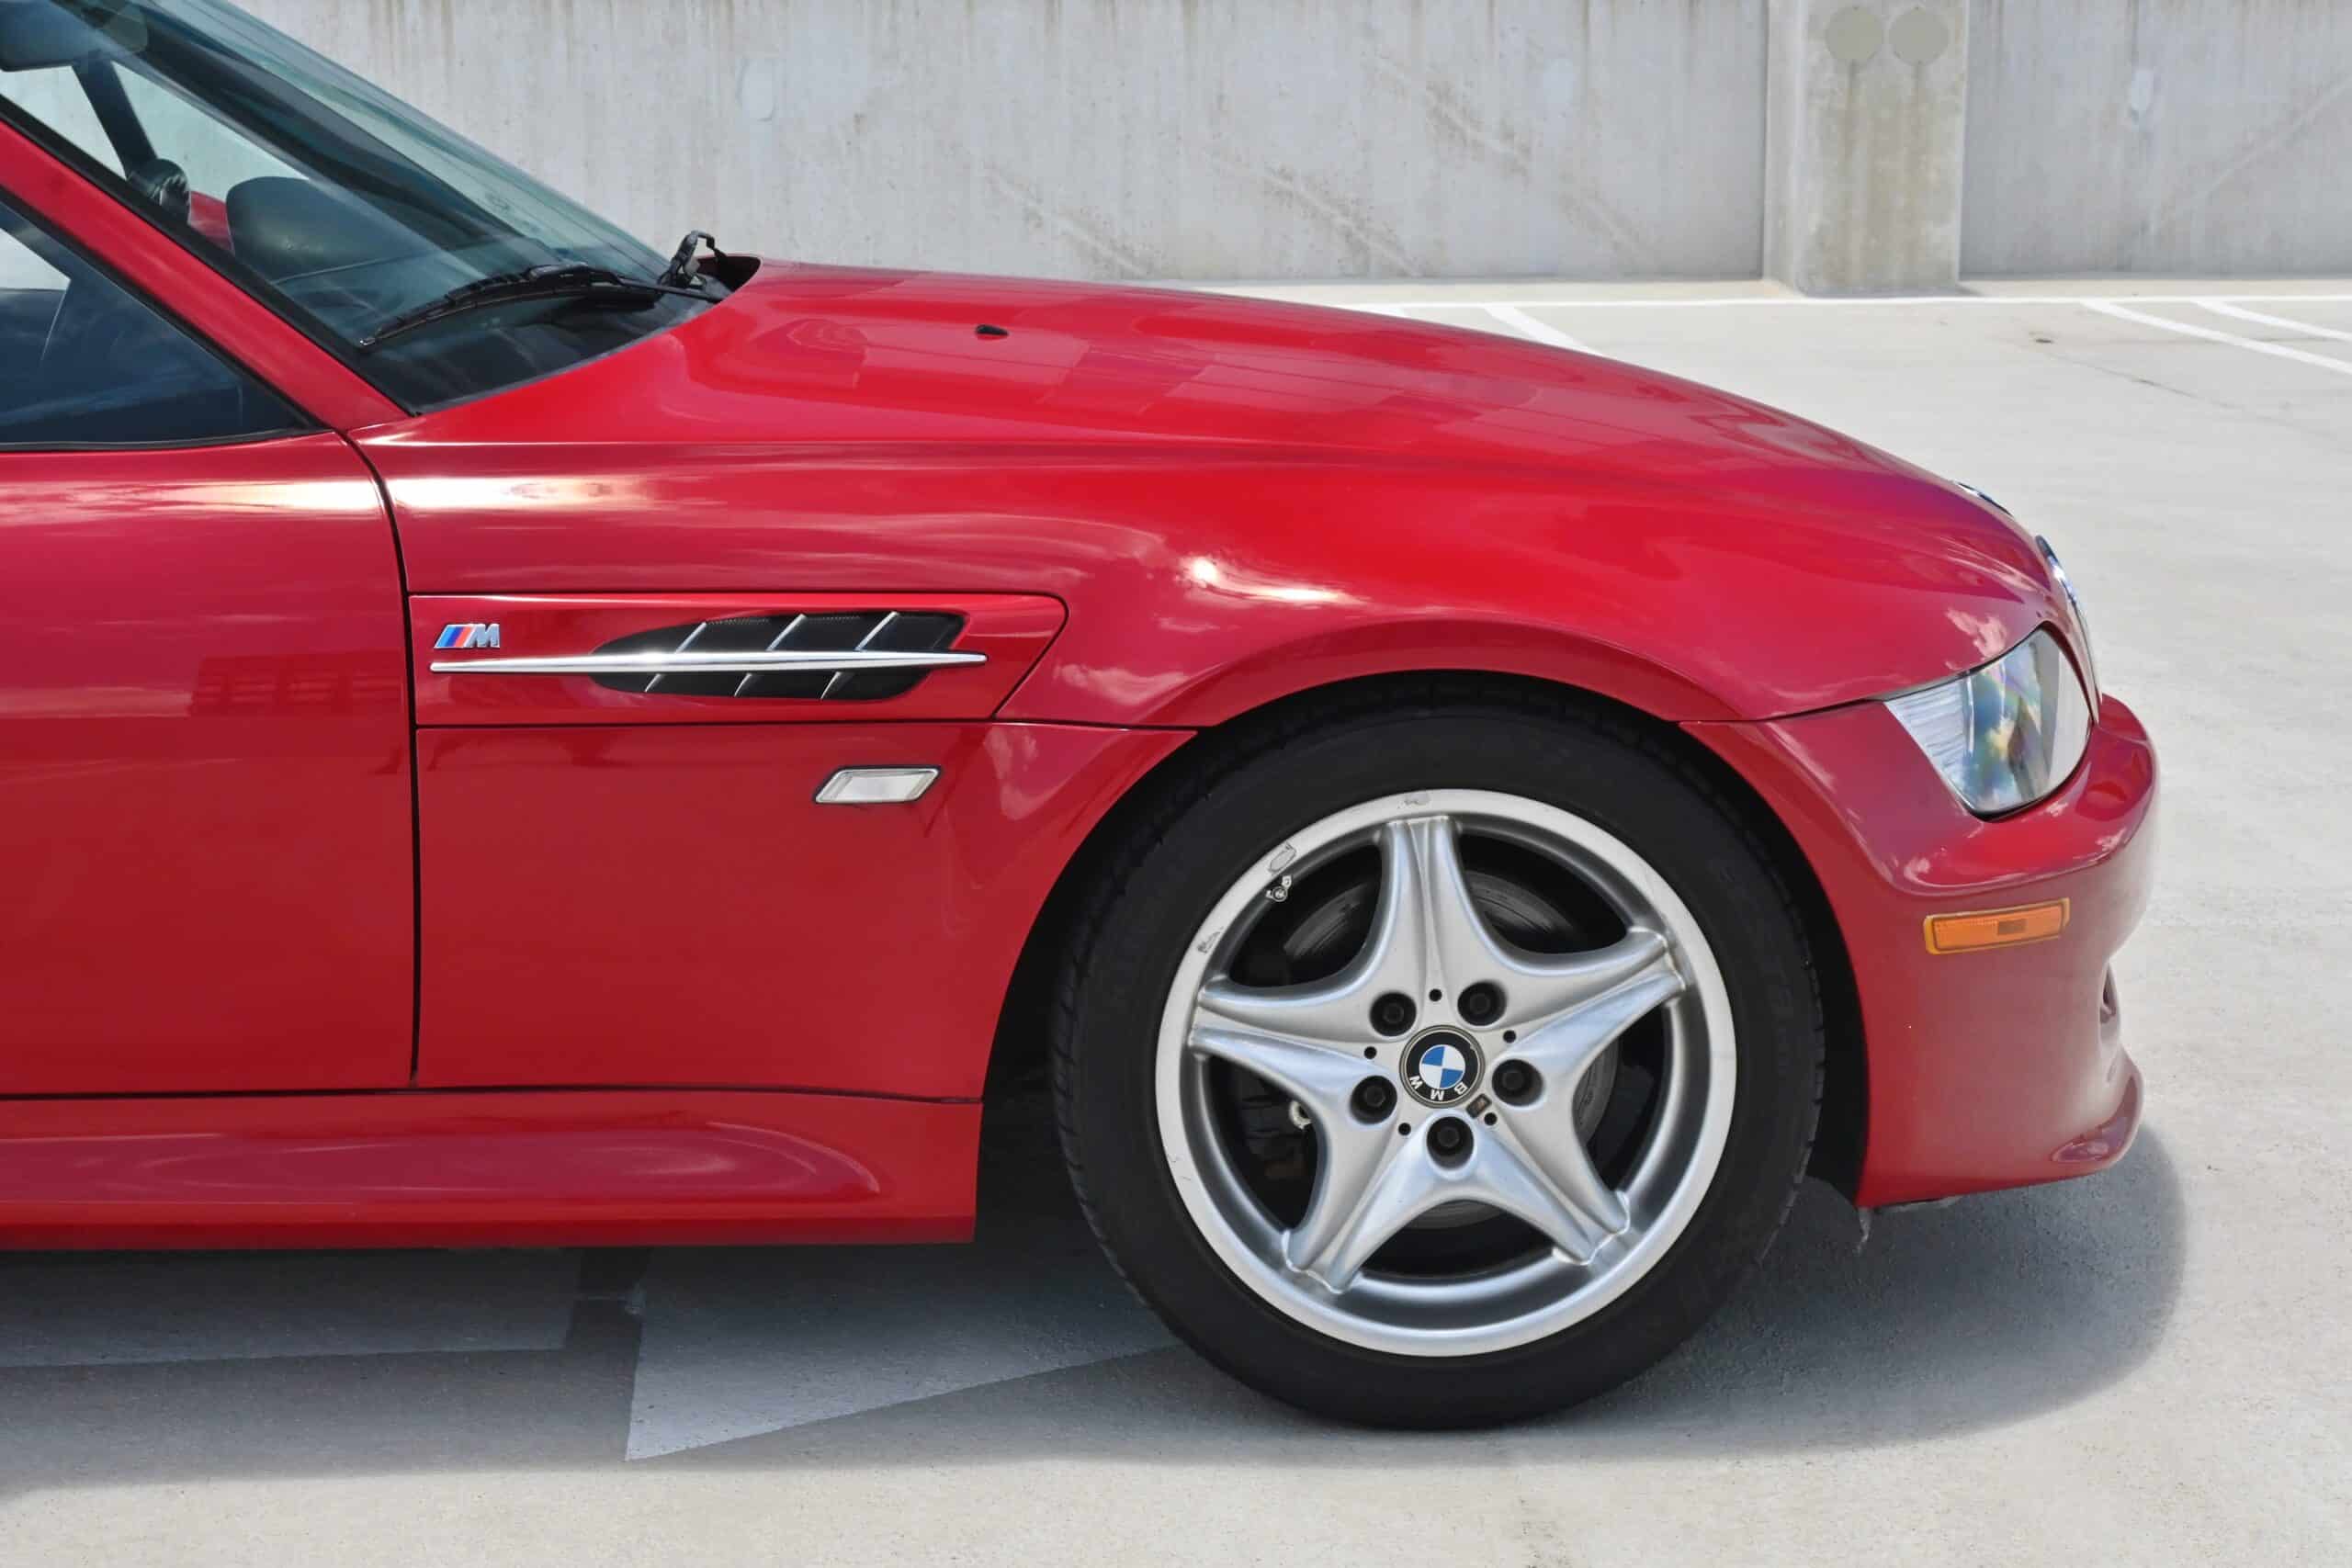 2000 BMW Z3 M Coupe 1 of 183 Imola Red/ Black Z3M Coupes – Clean history – Freshly Serviced